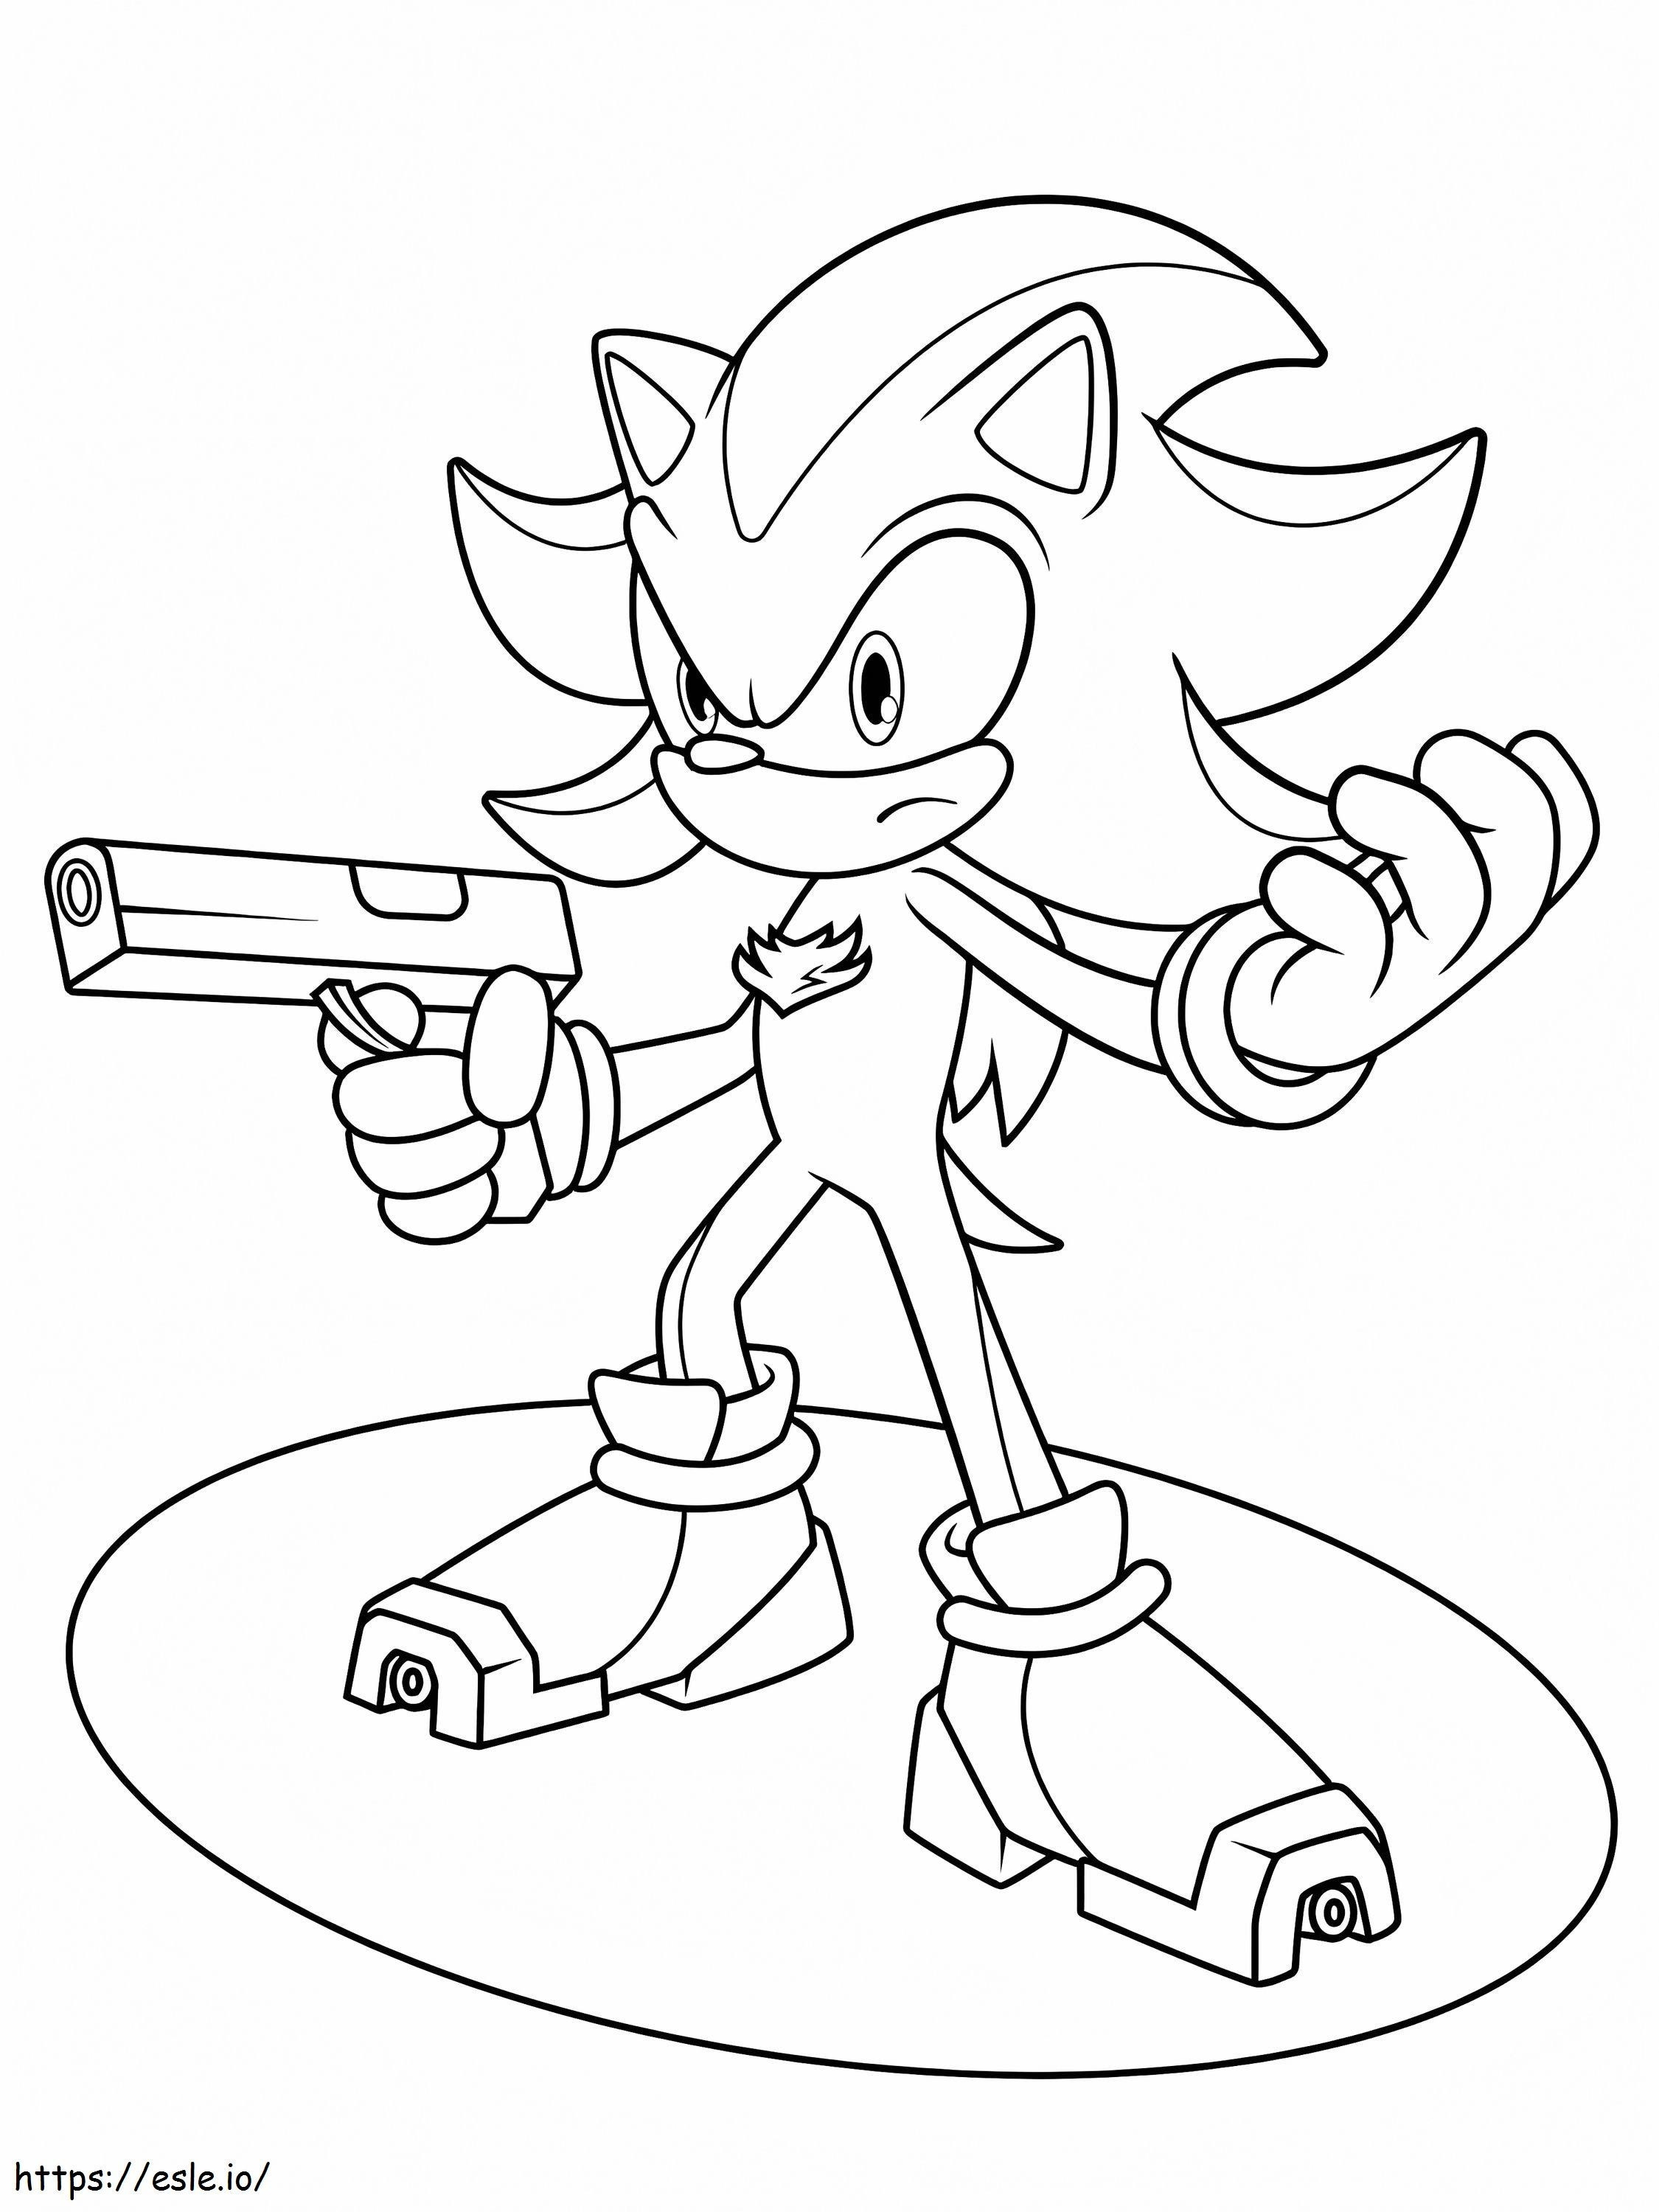 Shadow With Gun coloring page